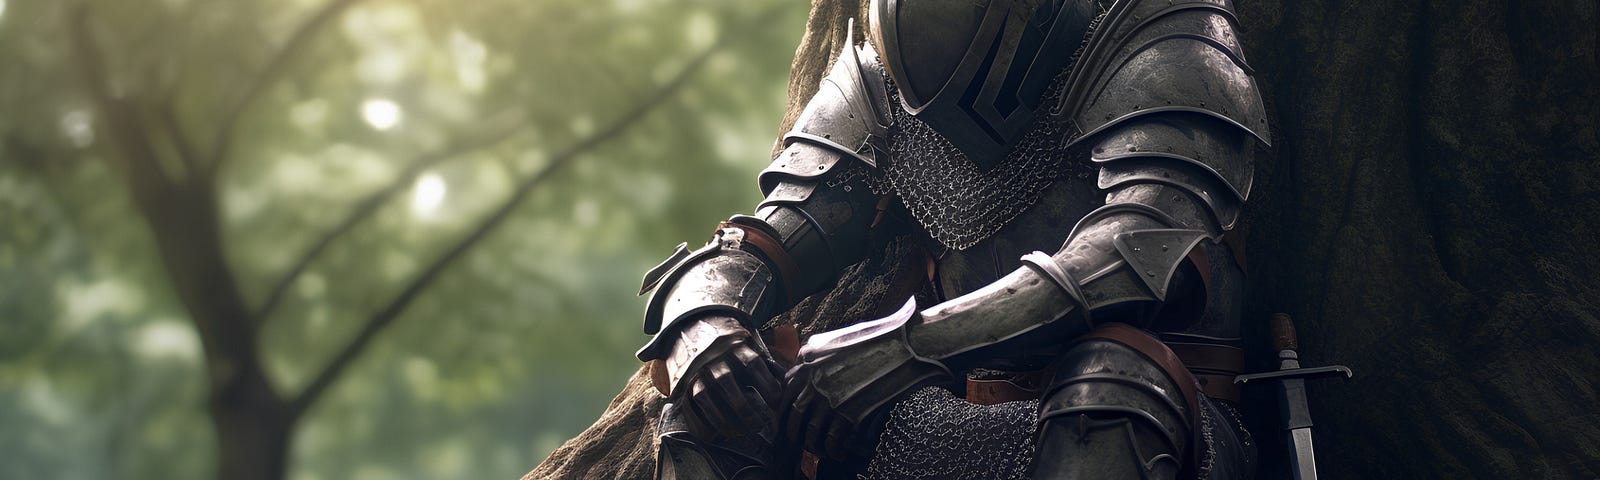 Medieval knight sitting under a tree in the forest. Fantasy medieval period.